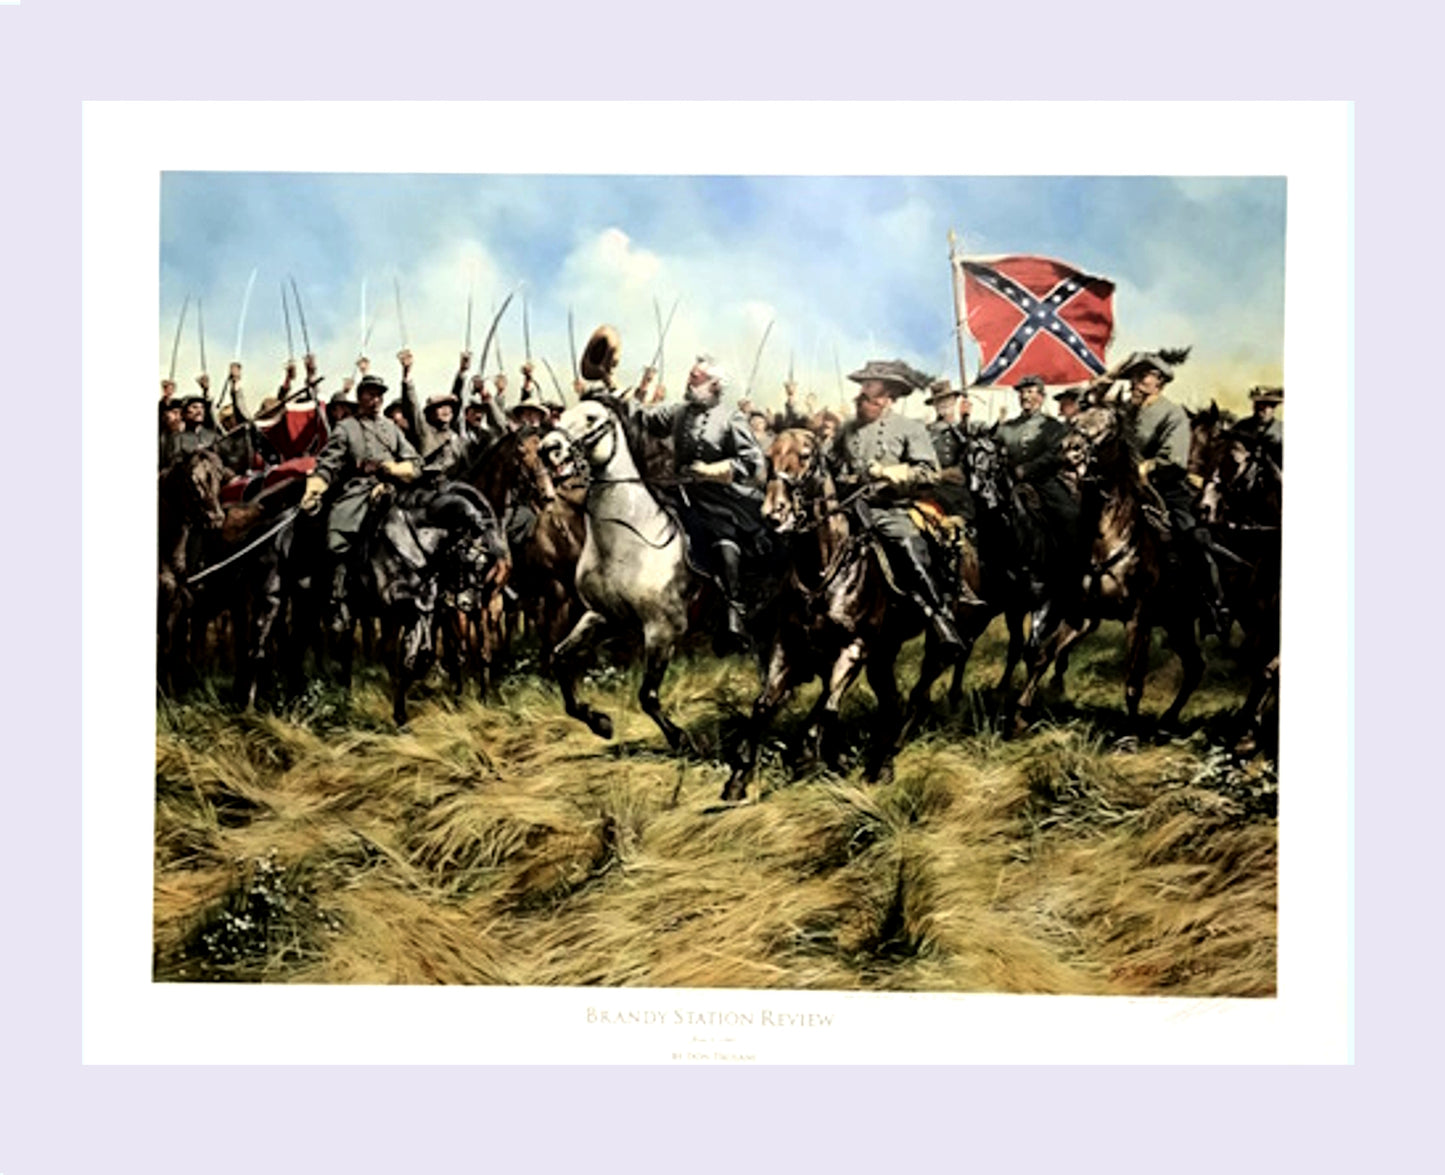 BRANDY STATION REVIEW Limited Edition Civil War Print by Don Troiani